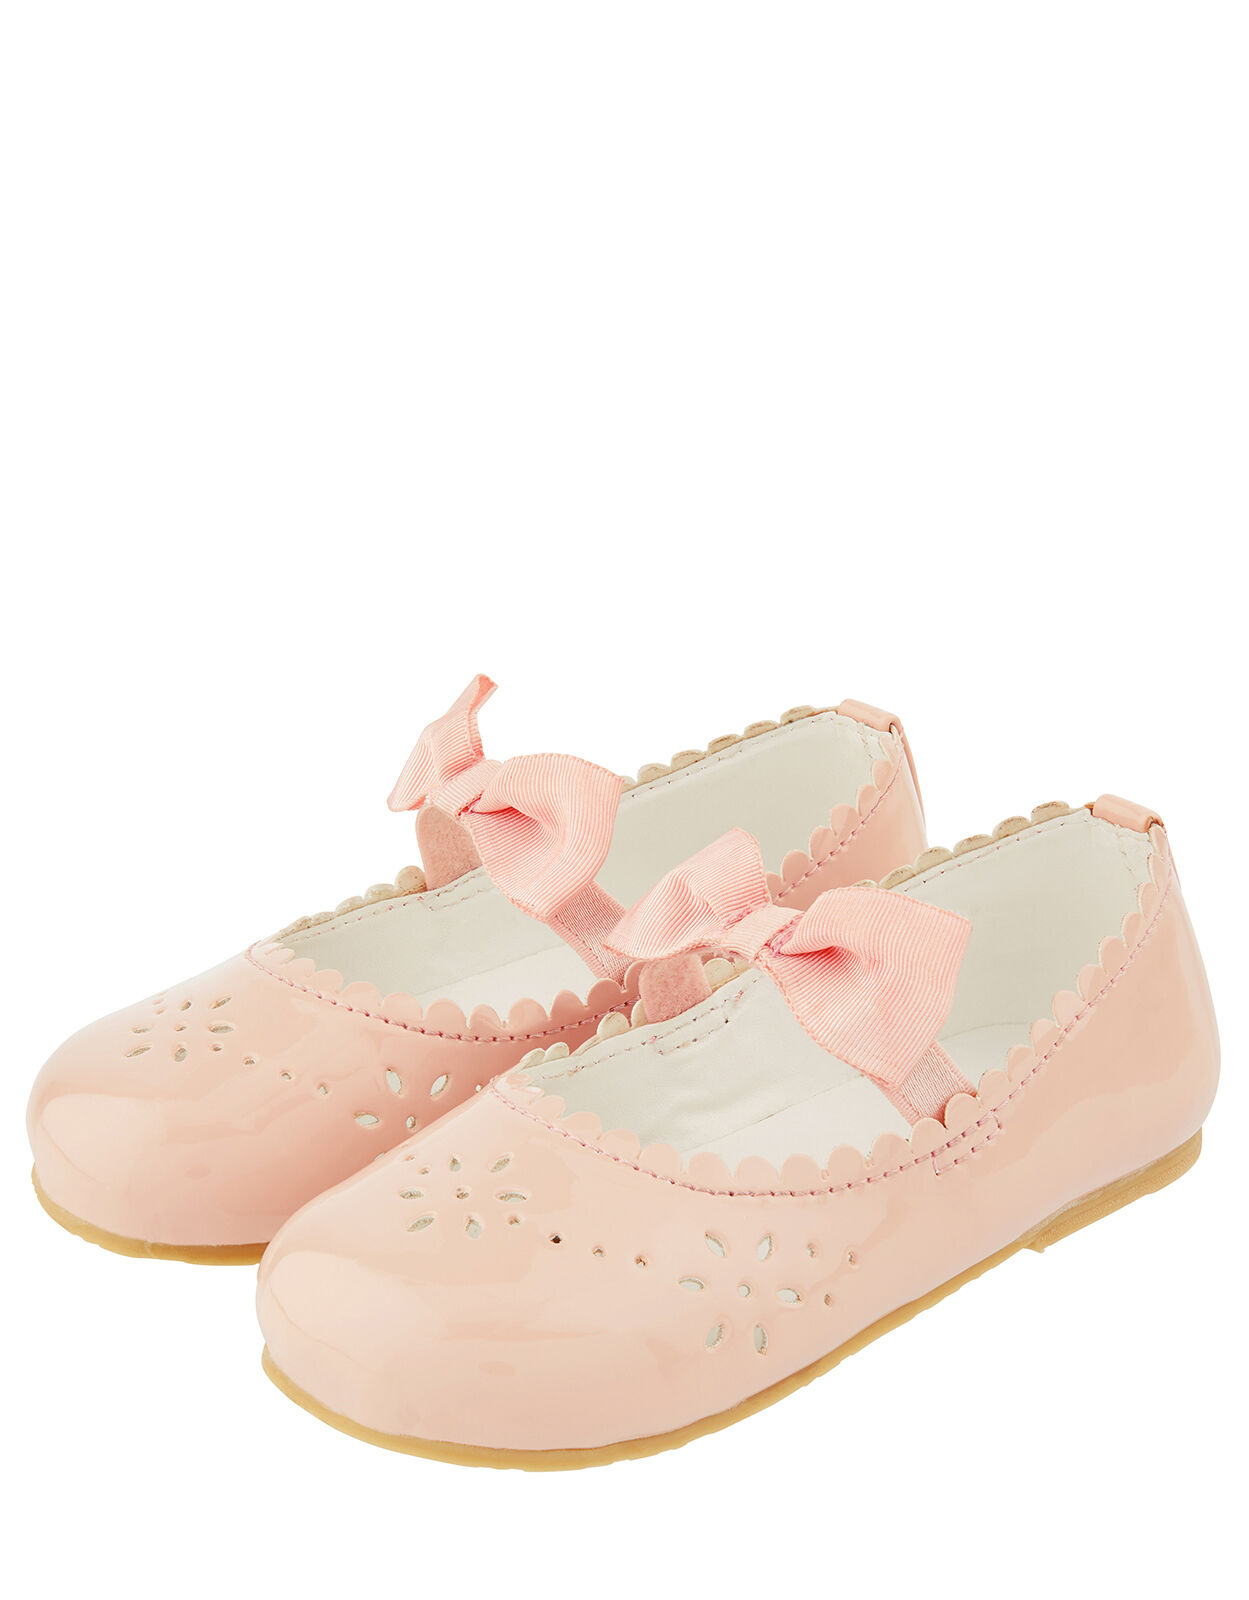 monsoon christening shoes